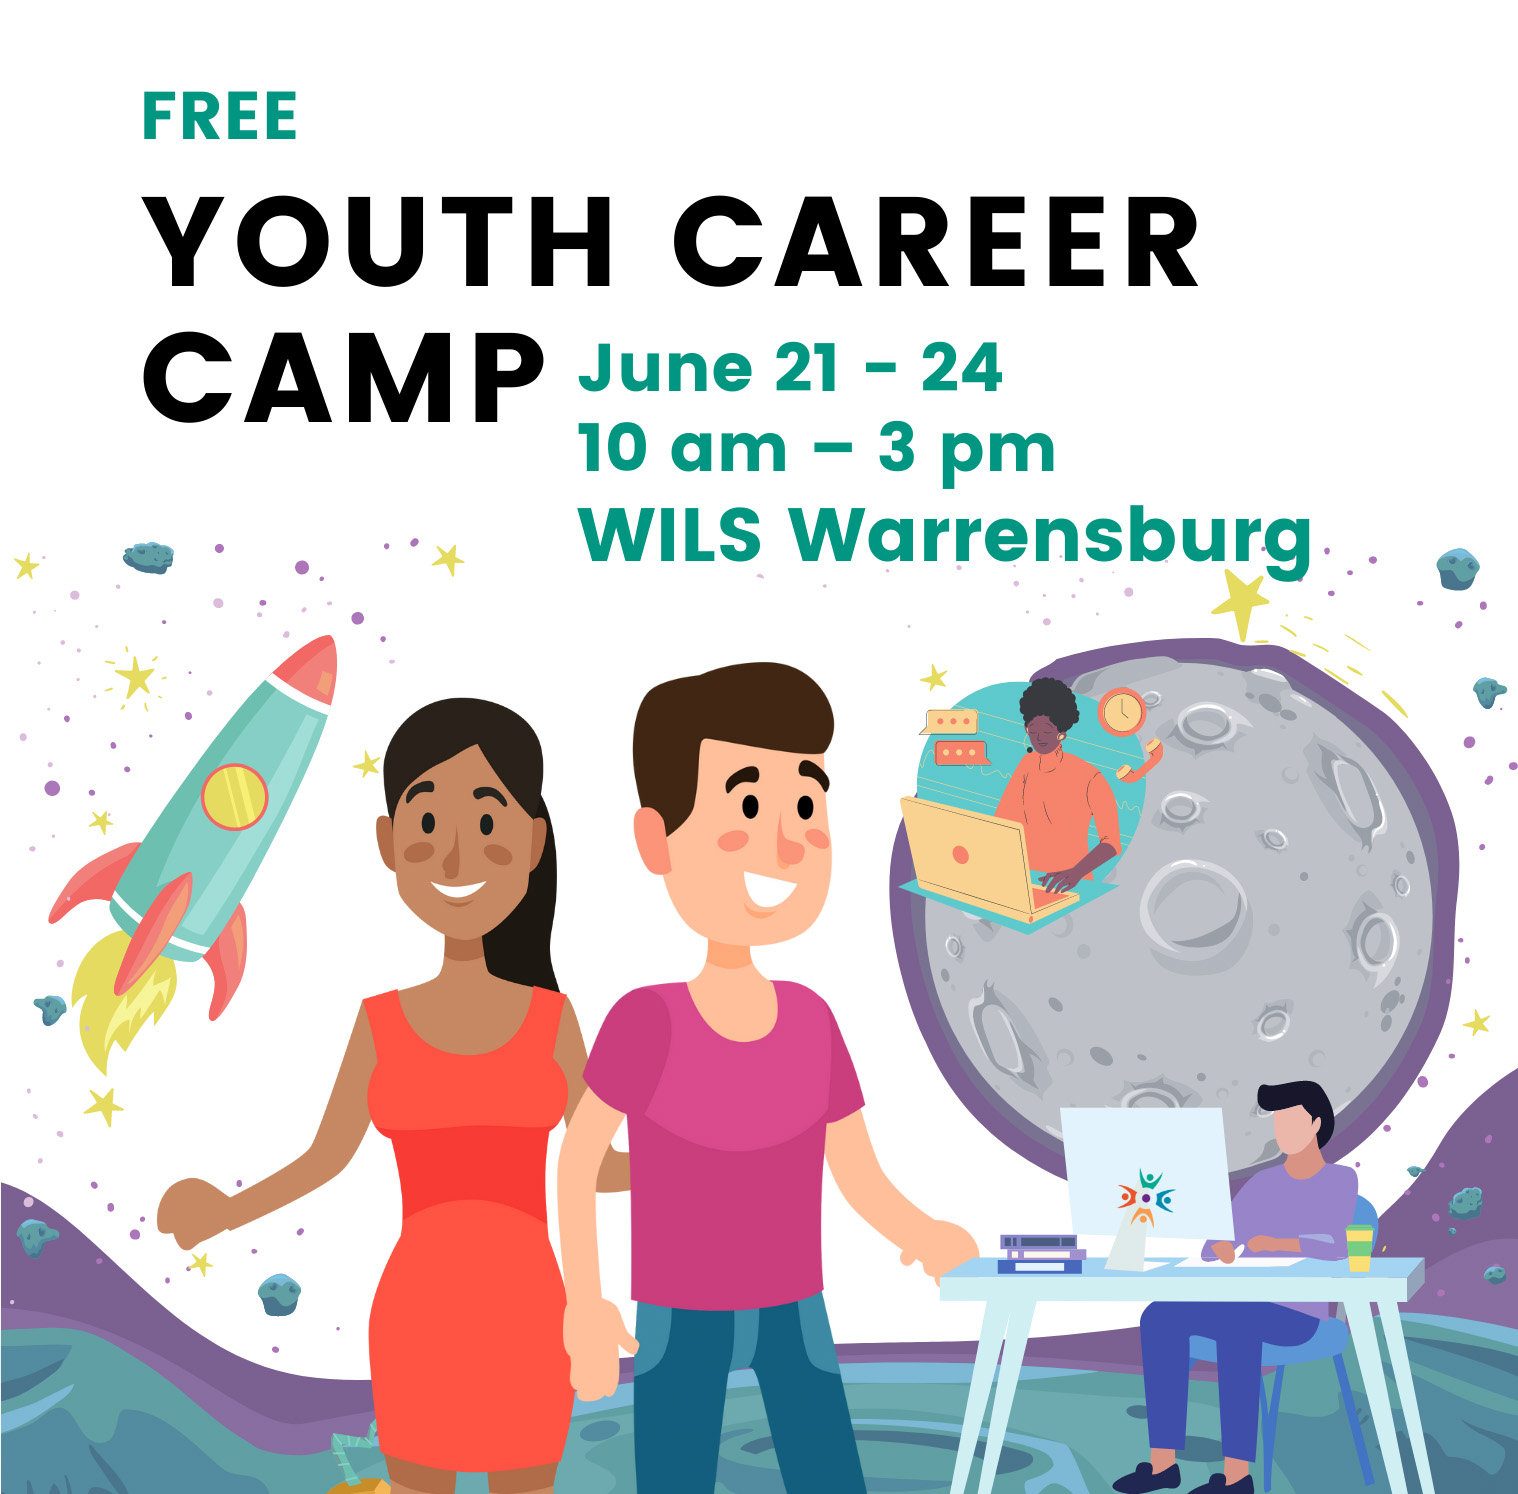 Free Youth Career camp. June 21-24, 10am - 3pm at WILS Warrensburg office